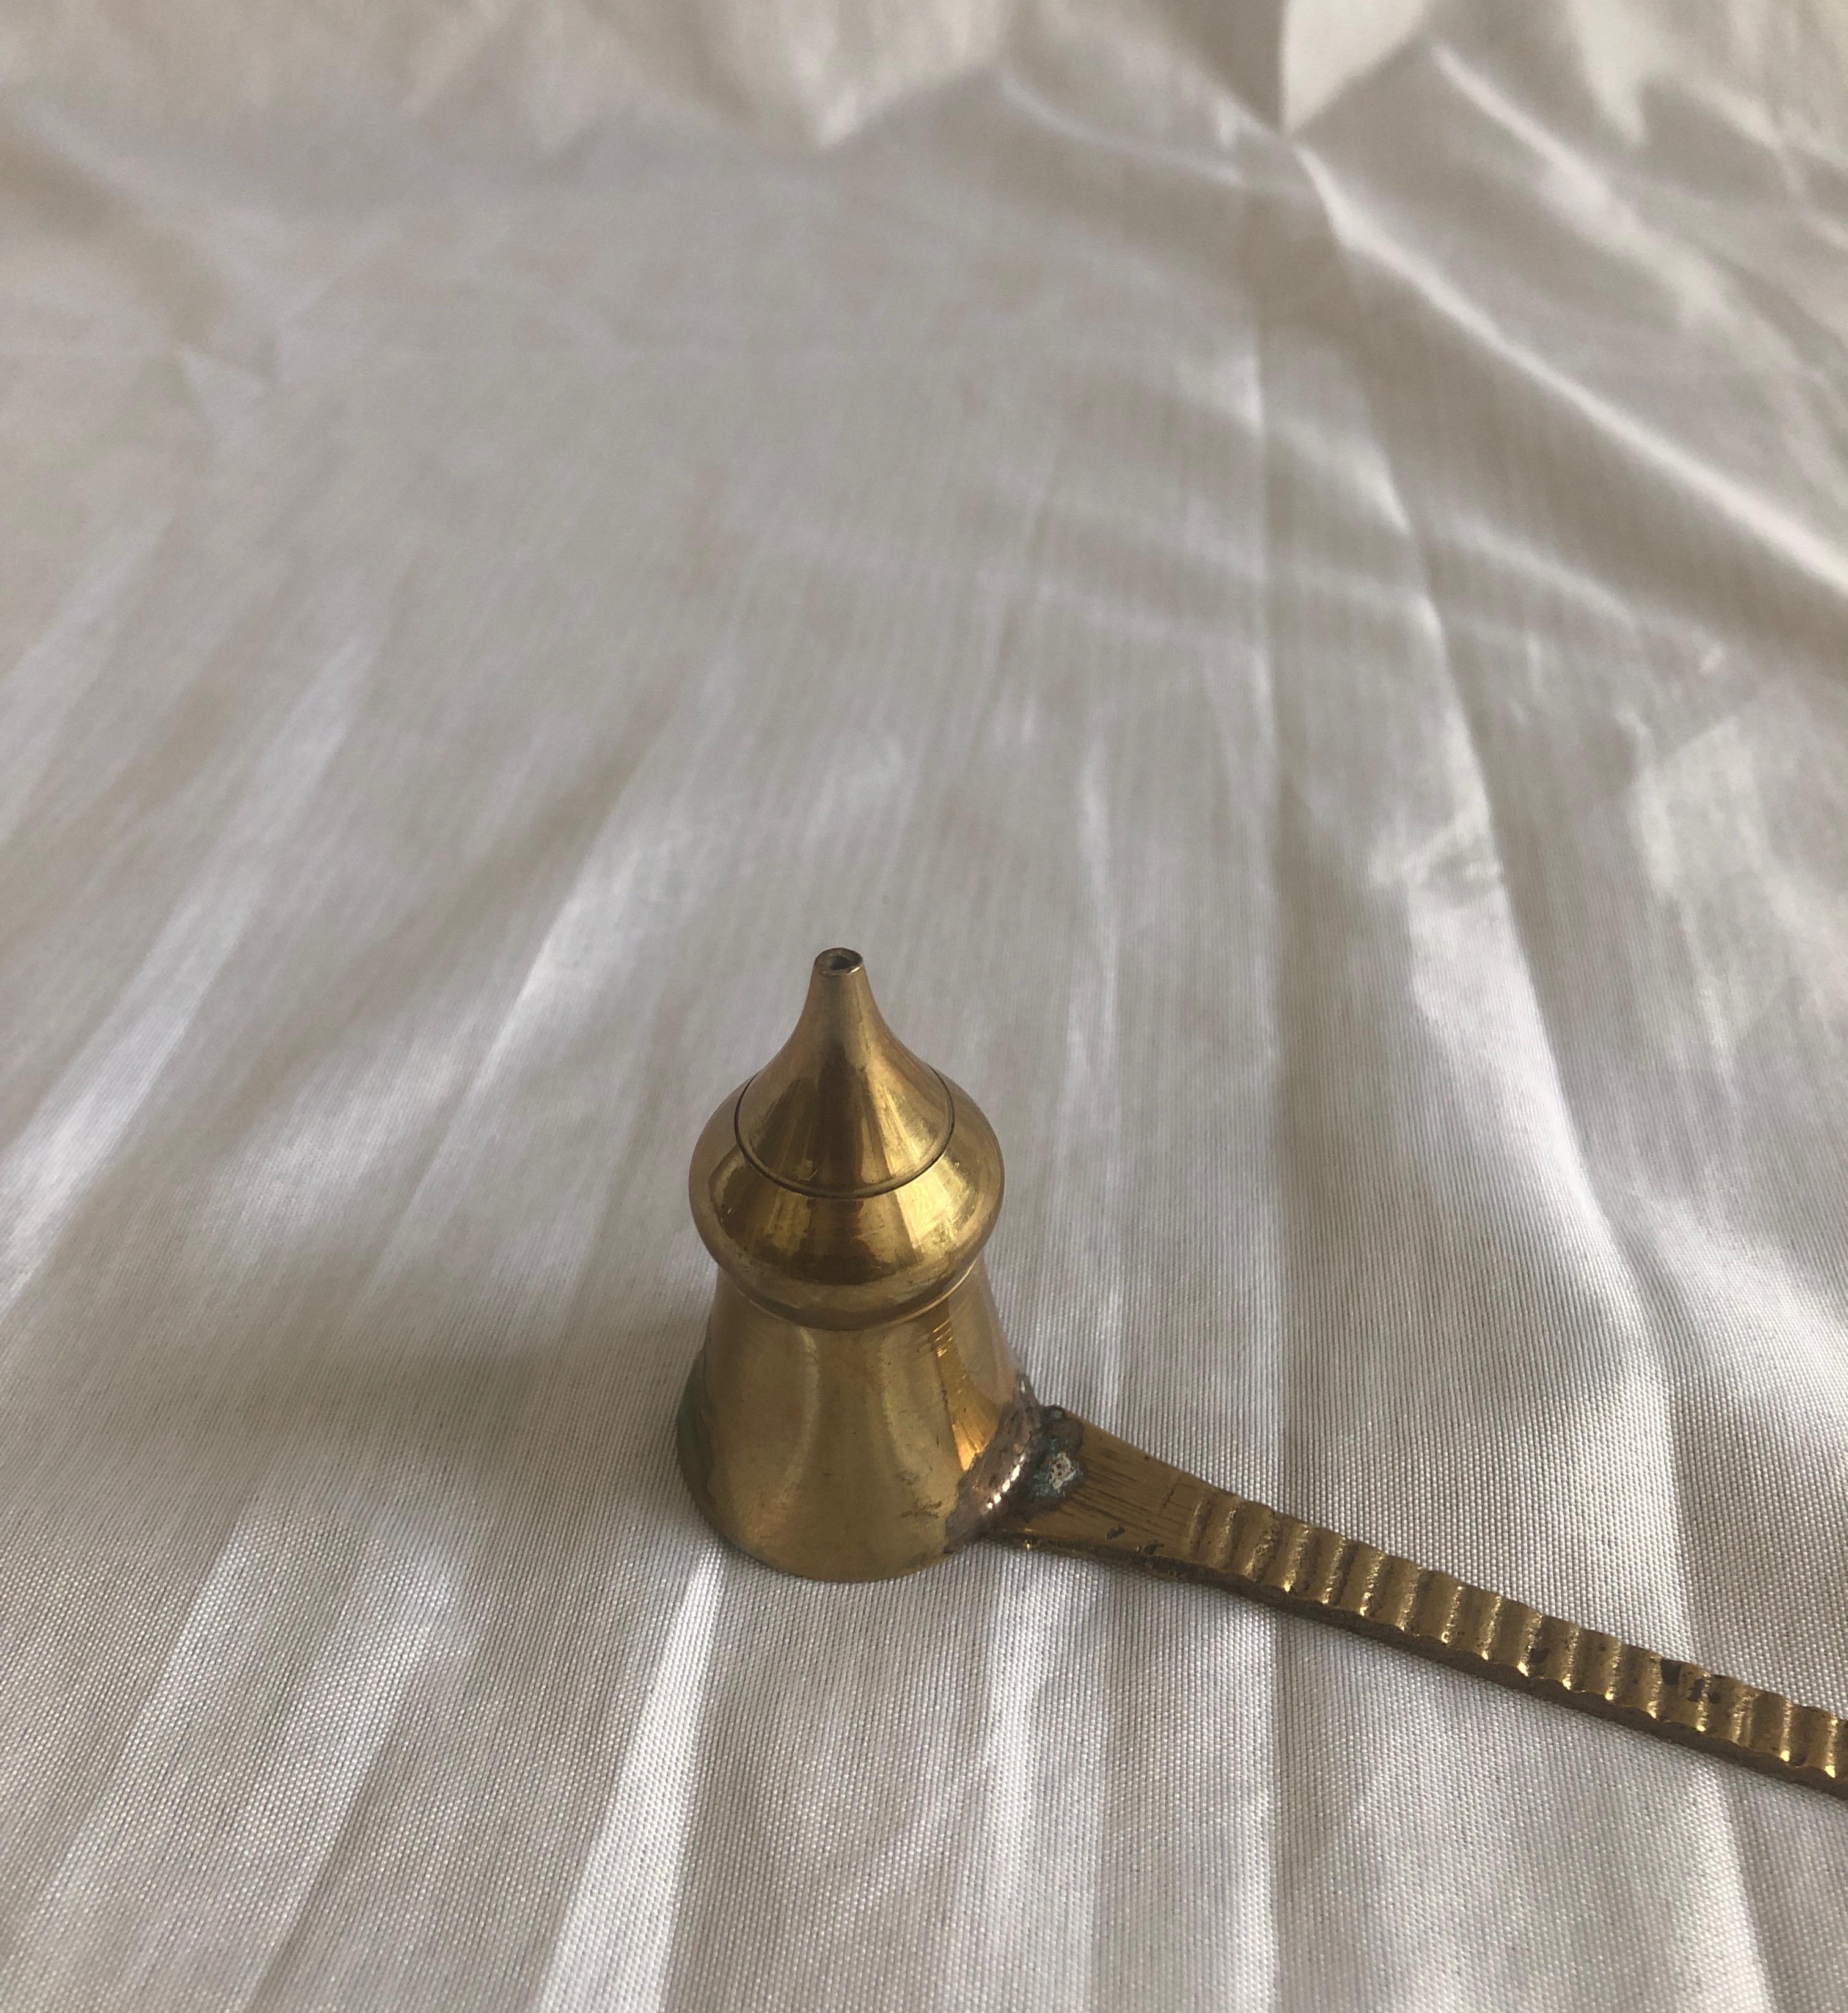 Vintage Indian brass candle snuffer.
Conical shape snuffer with ribbed arm and rounded handle.
Size: 9” L x 2.5” H x 1.5” D.